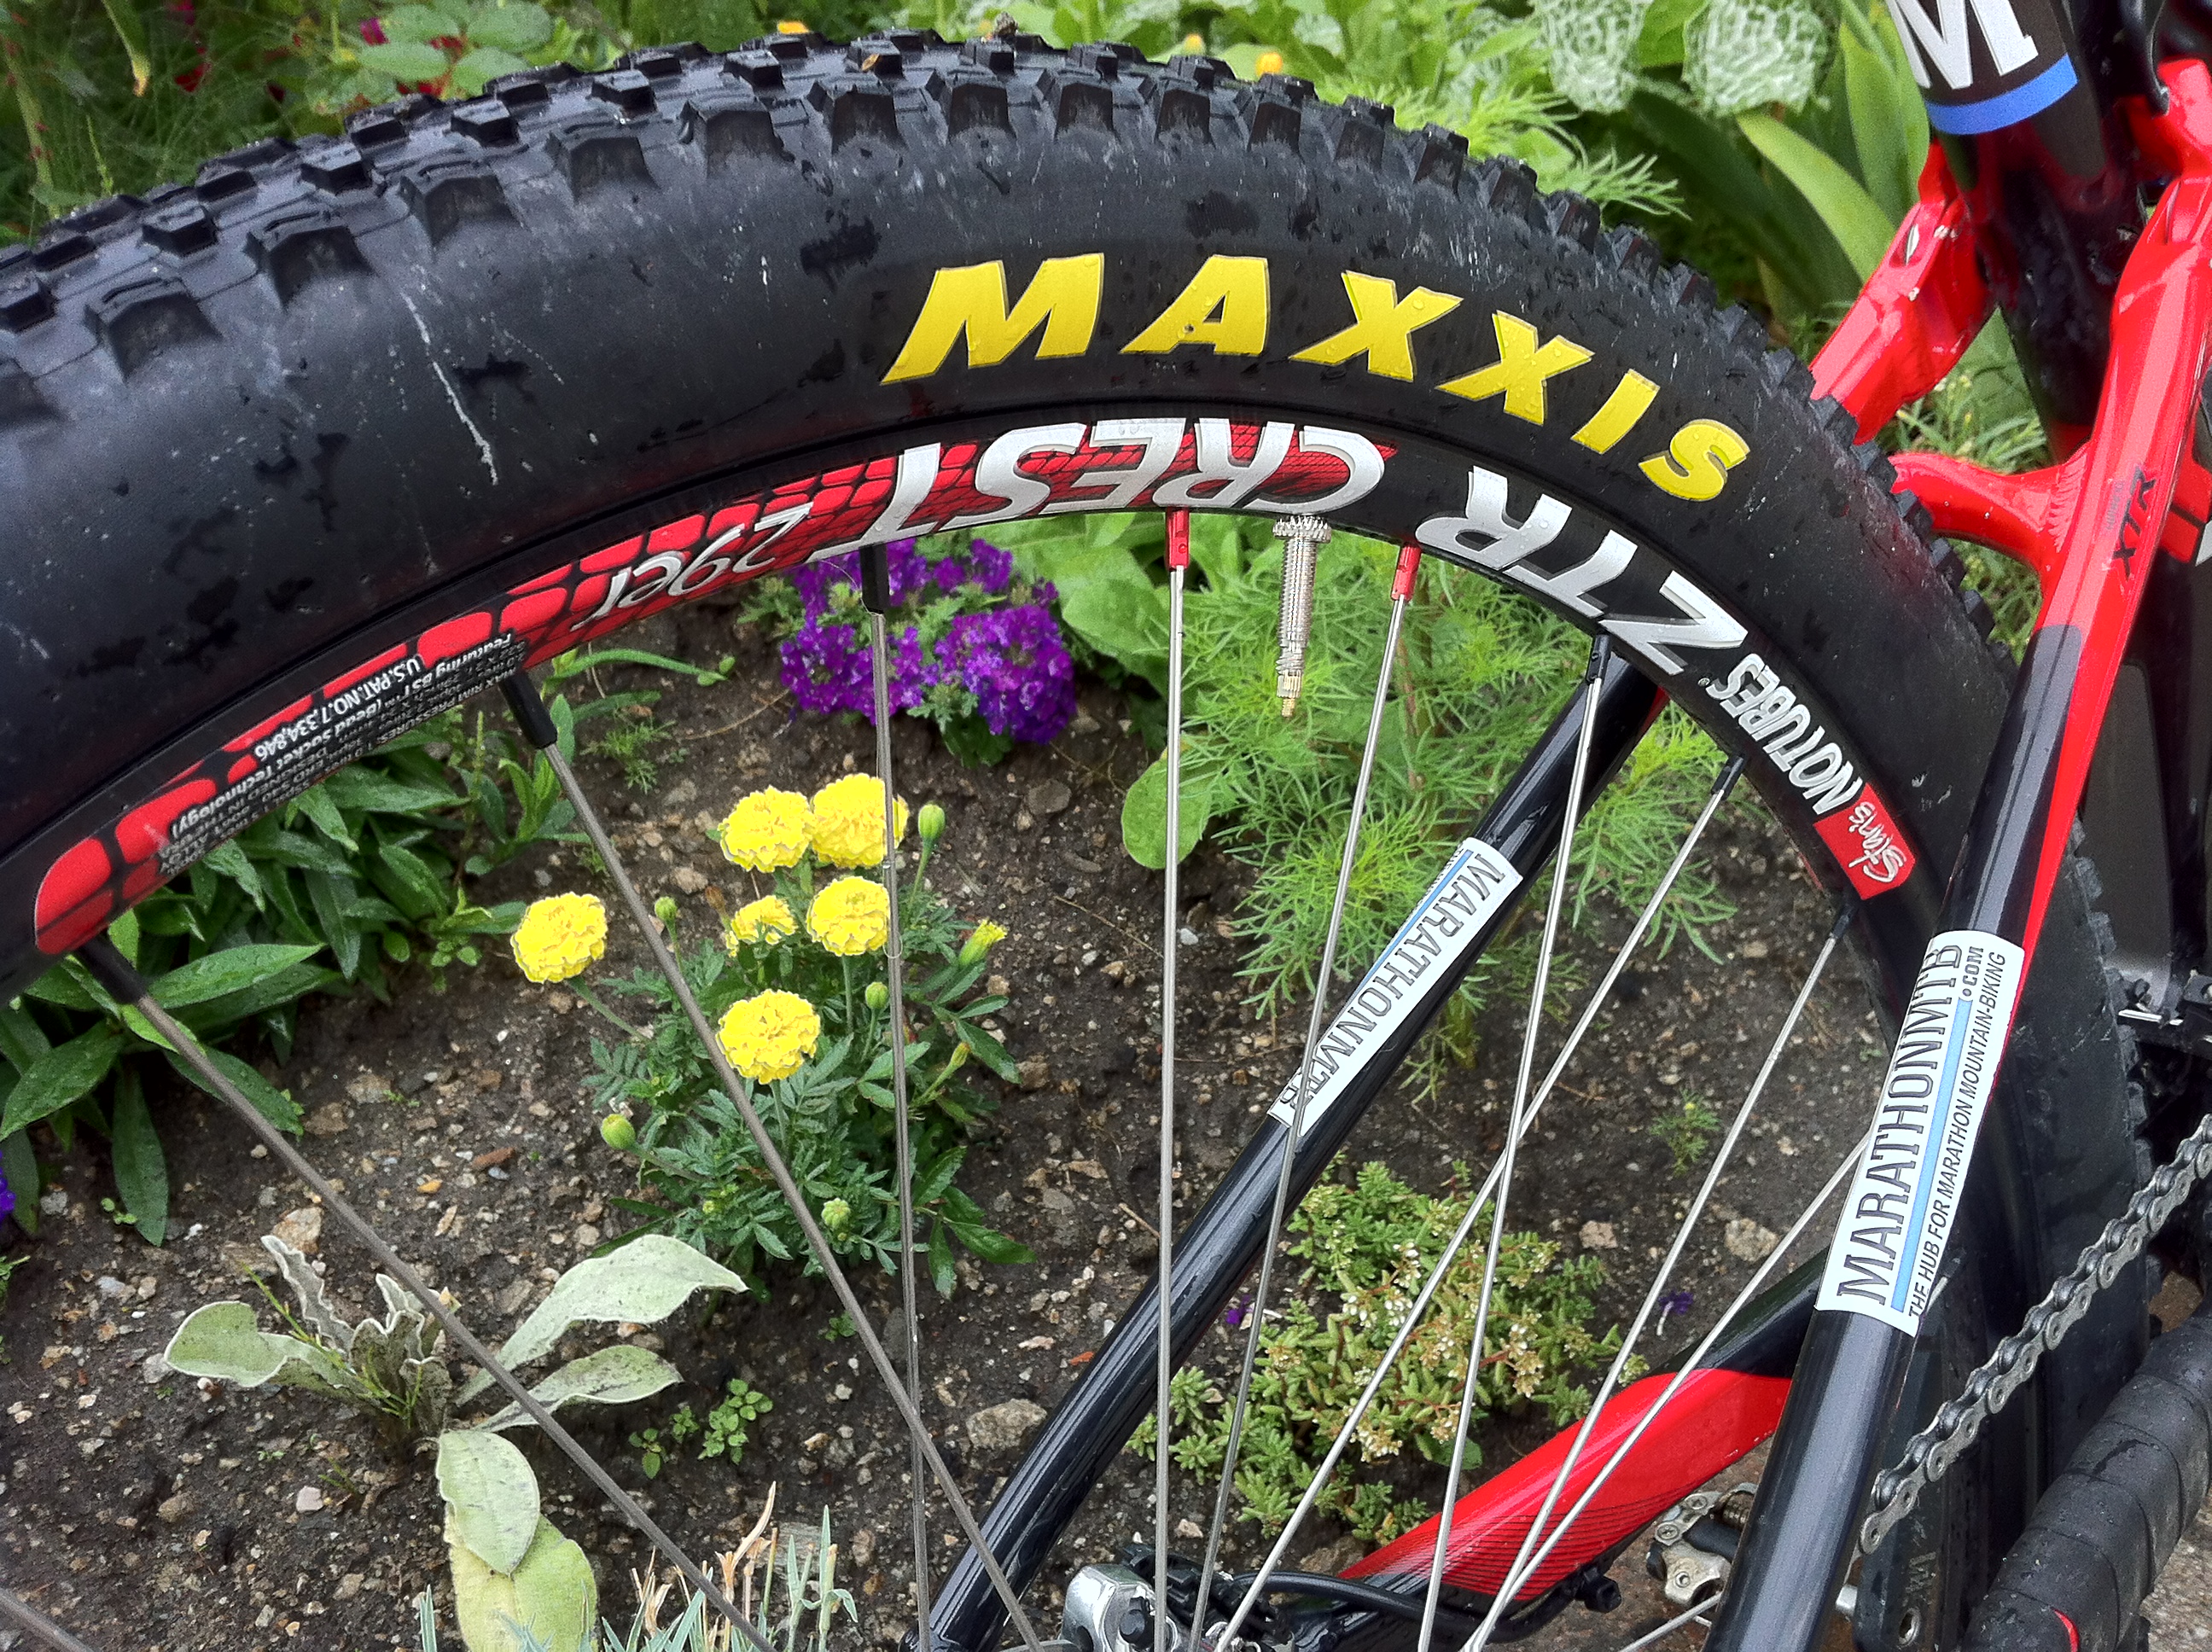 New tyres and new wheels - feeling flash for the Dolomiti Superbike